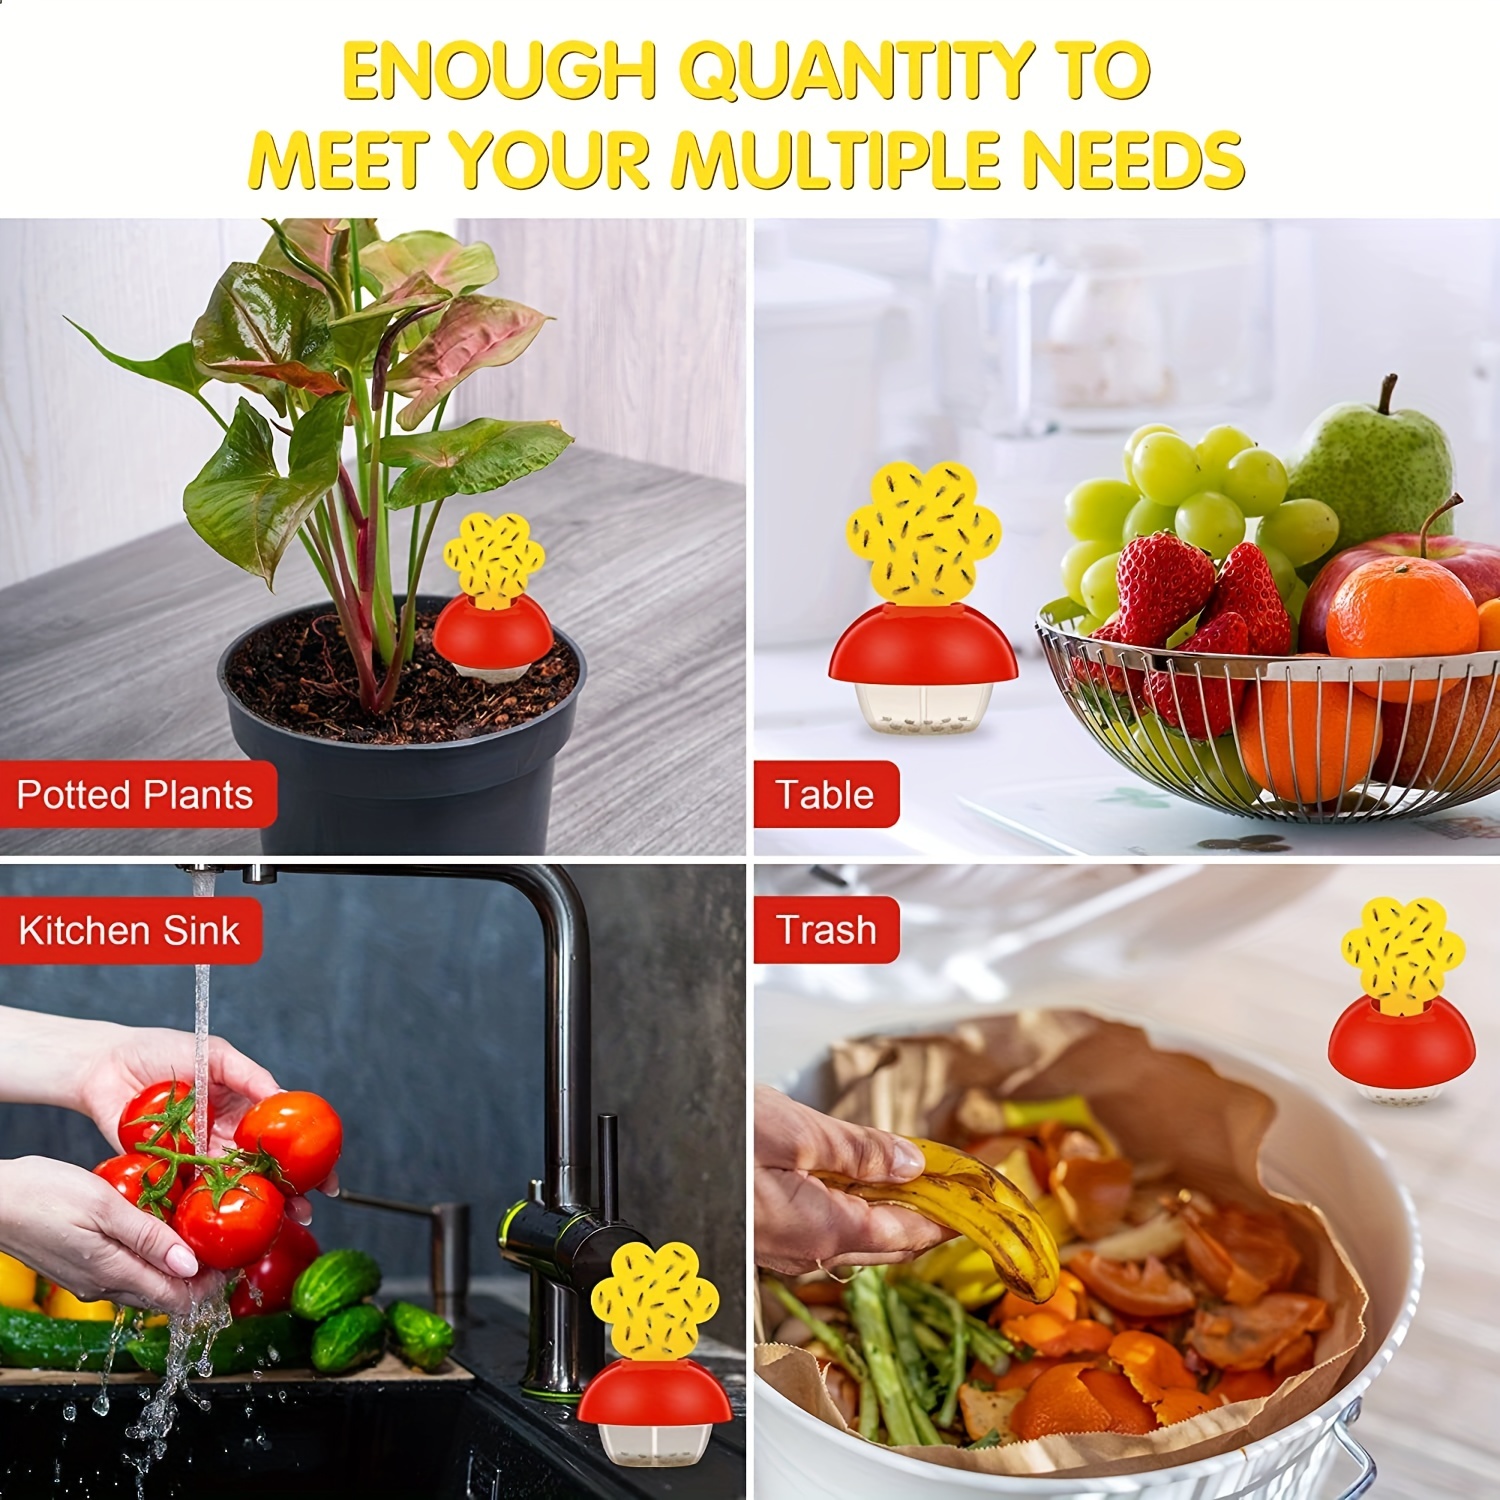 Fruit Fly Trap for Home + Kitchen